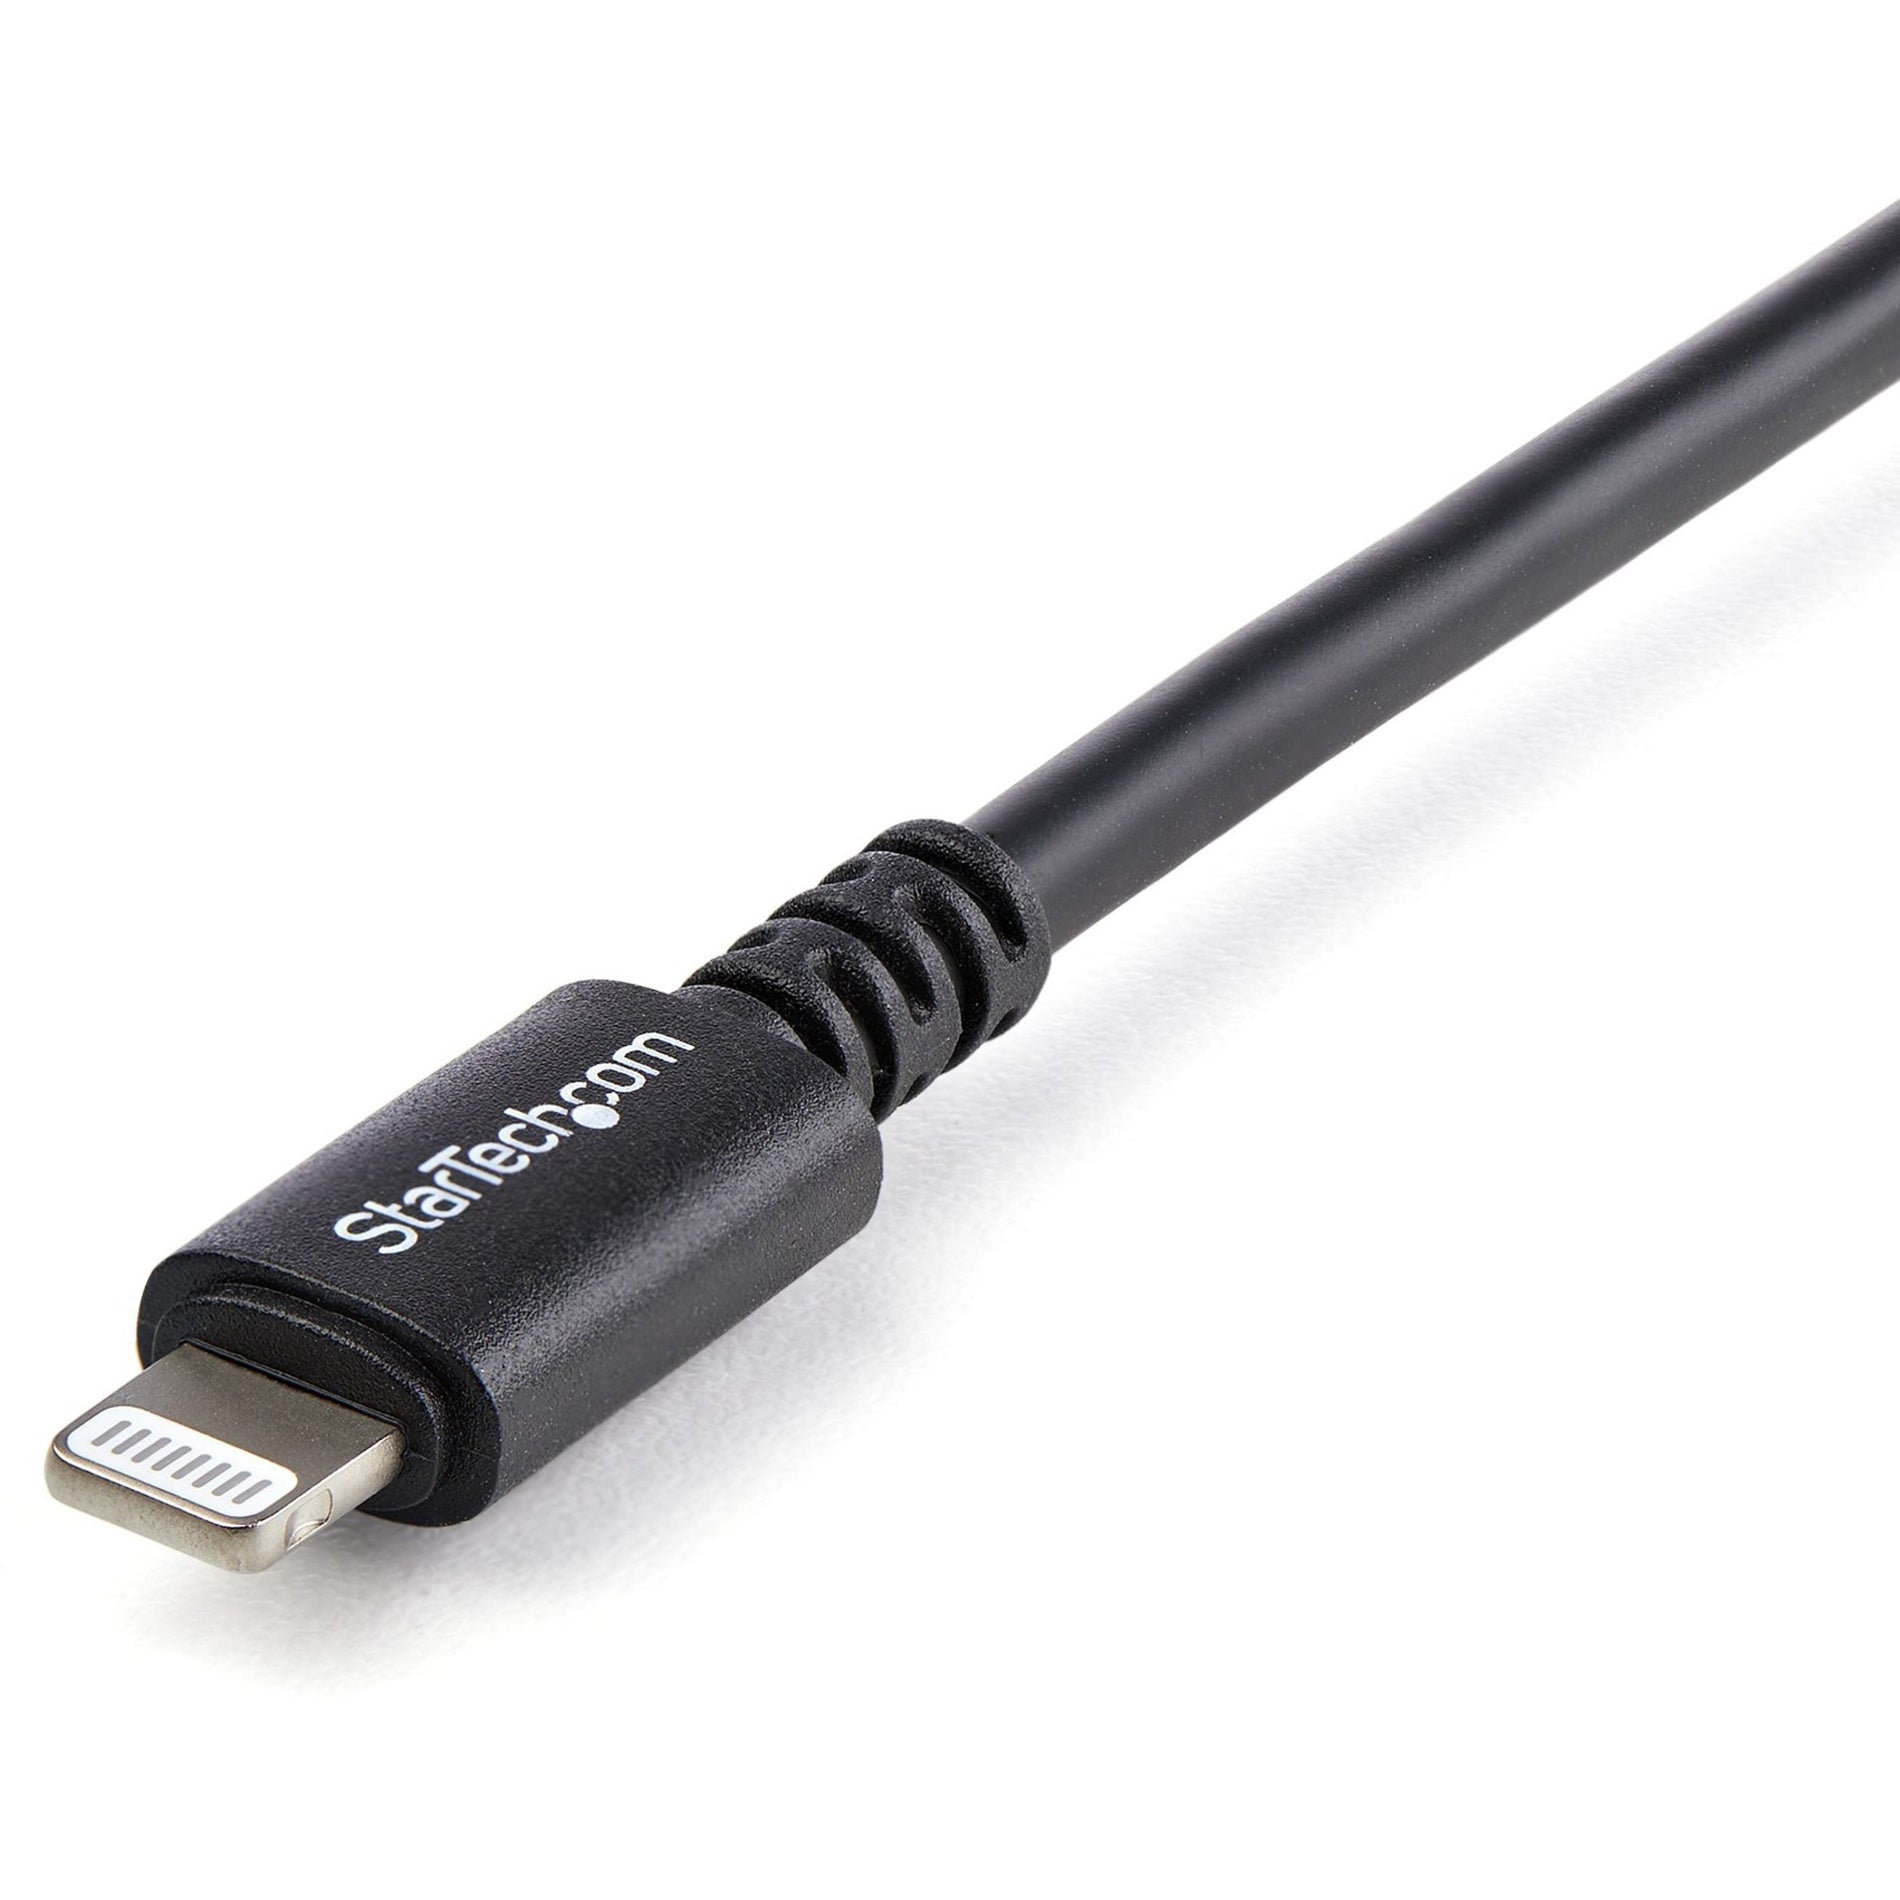 StarTech.com USBLT3MB Sync/Charge Lightning/USB Data Transfer Cable, 9.84 ft, MFI Certified, Reversible, Black